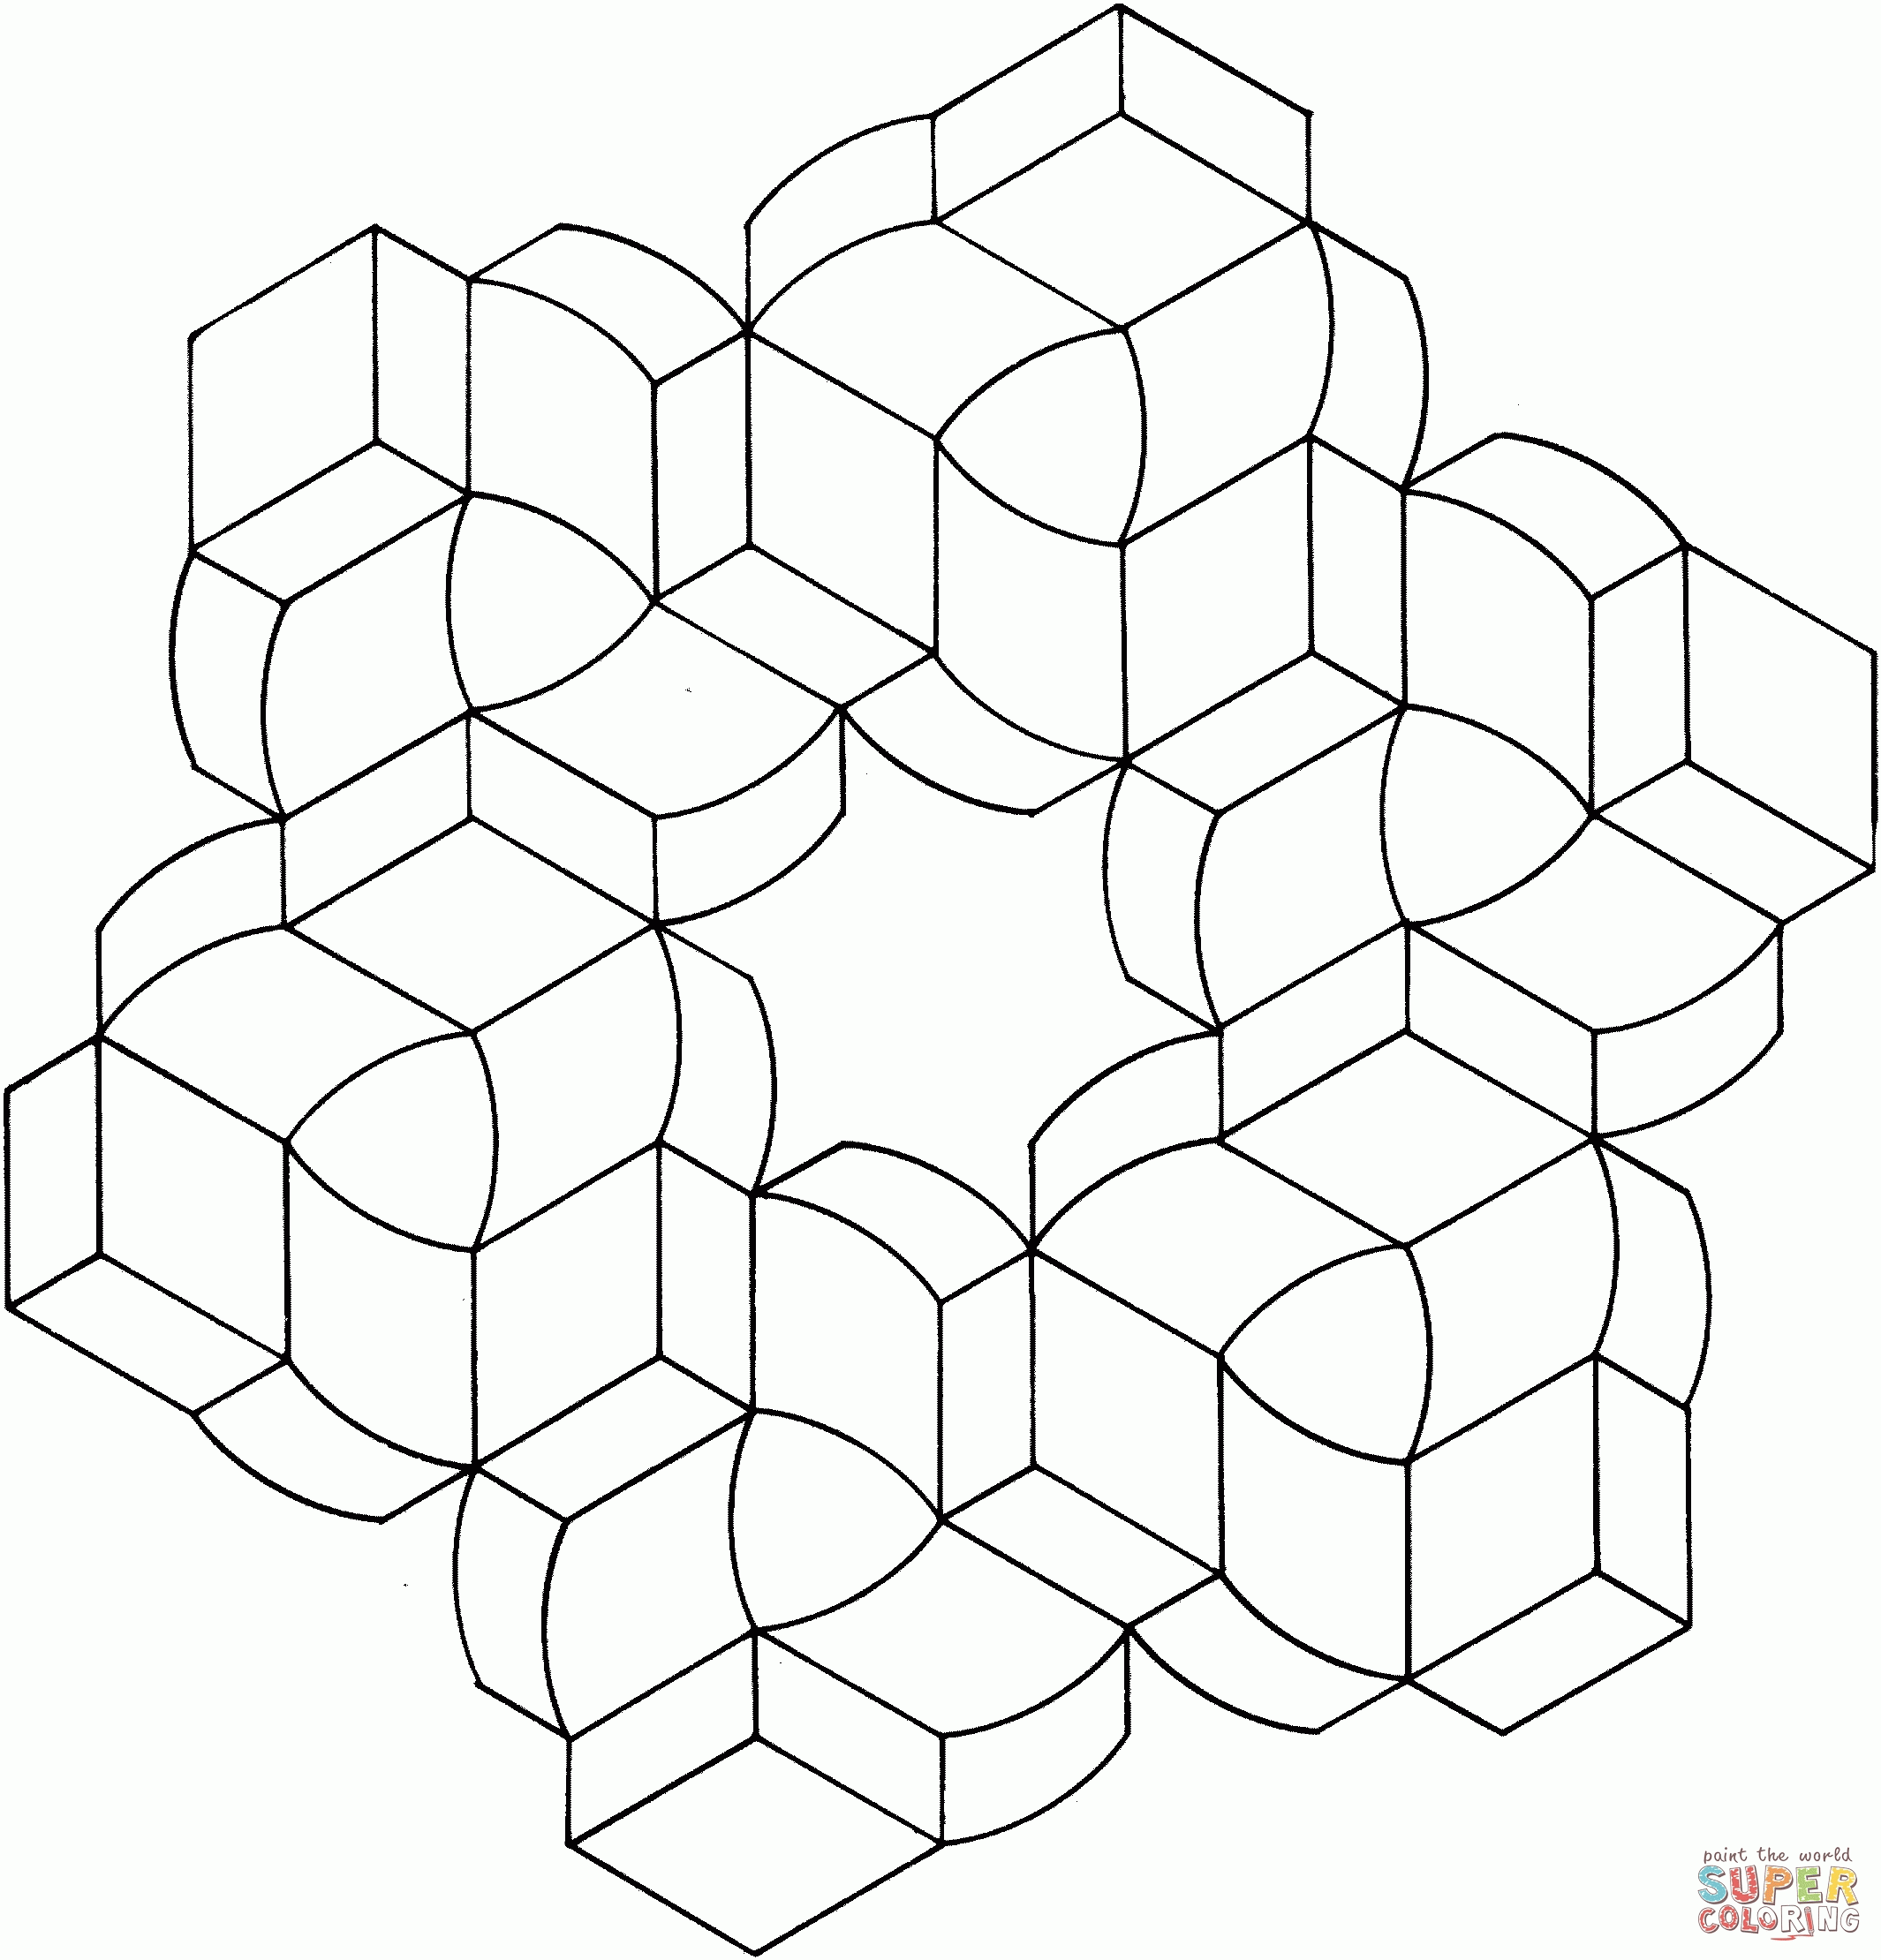 Printables Optical Illusion Coloring Pages 3 - Widetheme